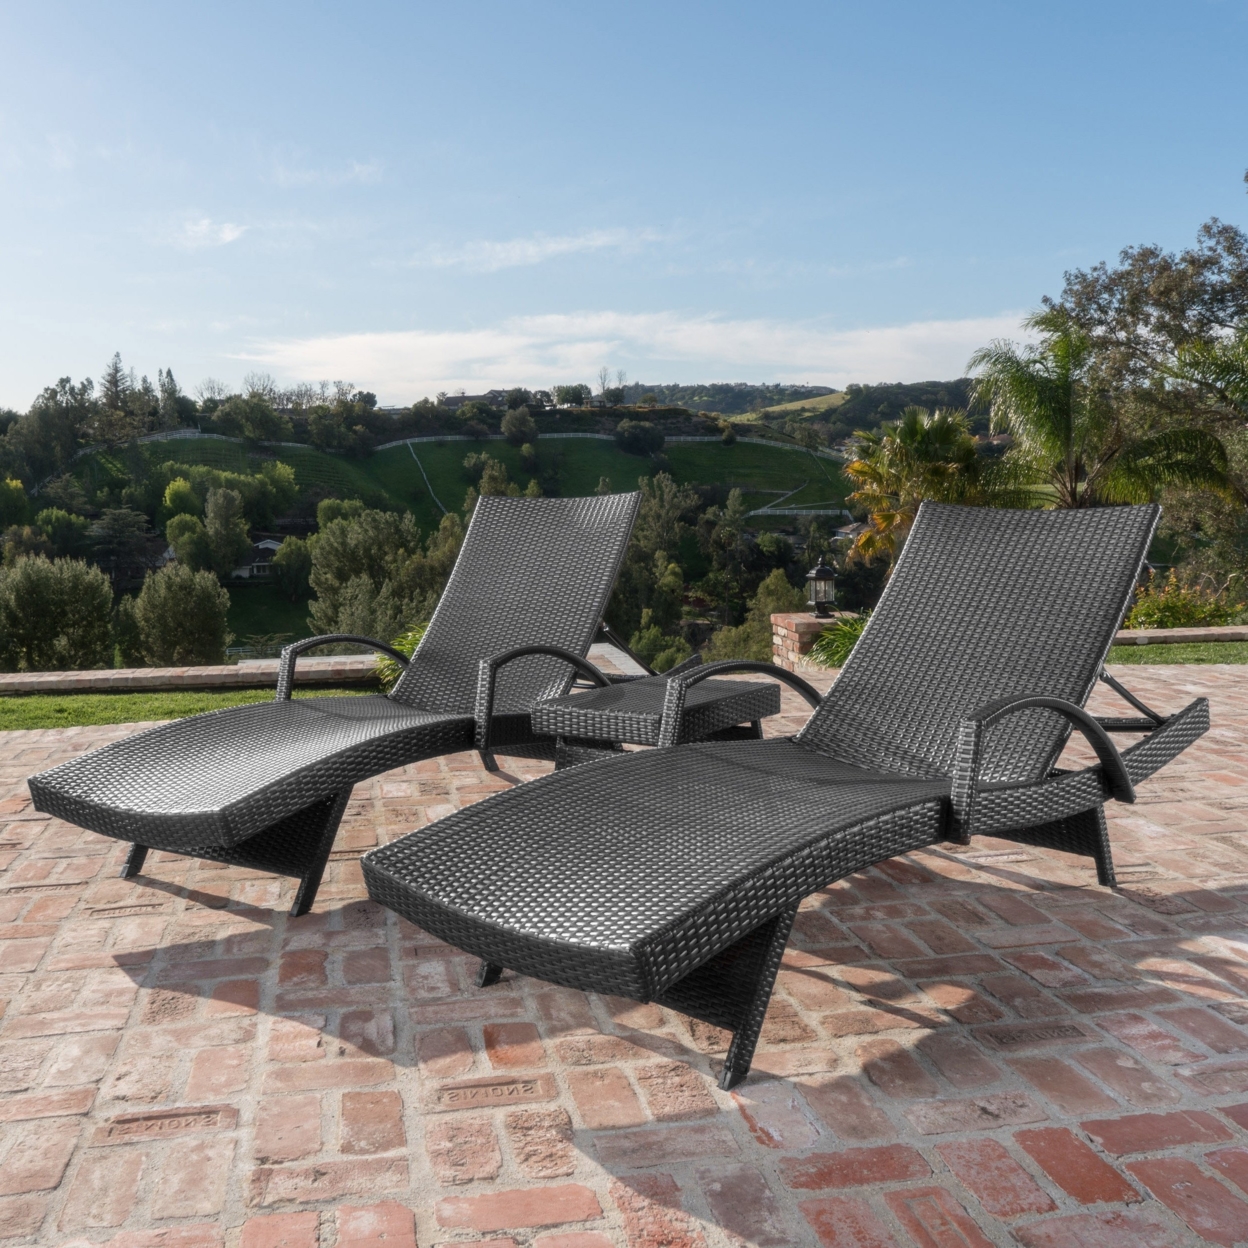 Soleil Outdoor Wicker Arm Chaise Lounges (Set Of 2) With Side Table